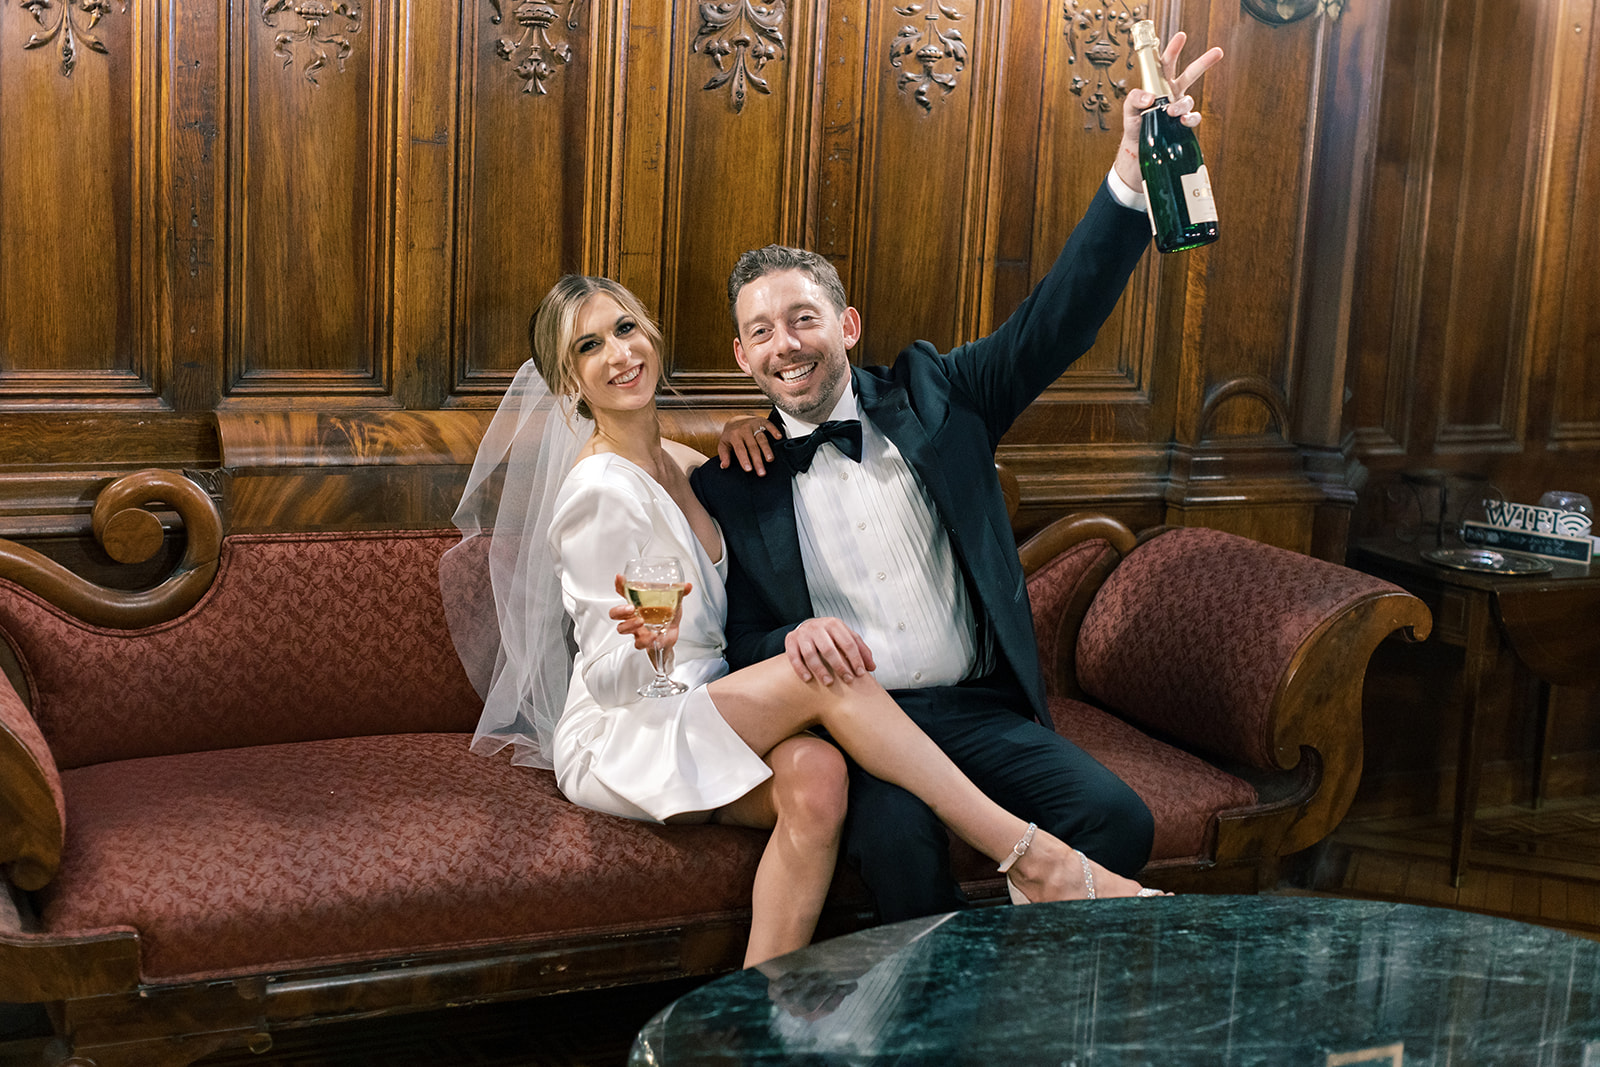 Bride and Groom pose with champagne glasses in hand. 